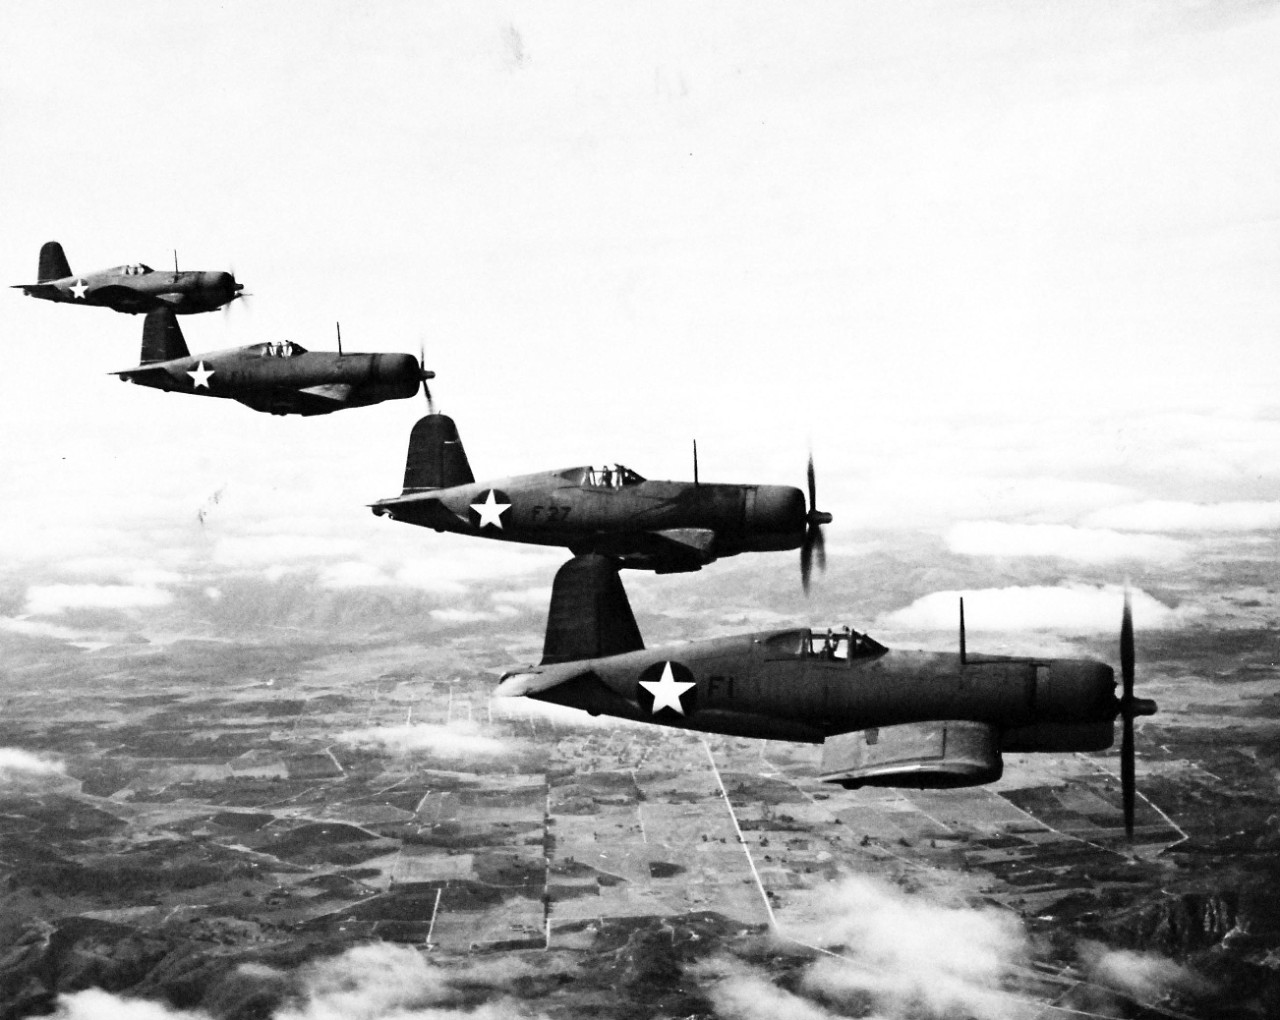 80-G-40930:  Vought F4U Corsair, March 1943.  Formation of F4U-1 planes, March 23, 1943.   Steichen Photograph Unit, photograph released, TR 2727, March 23, 1943.   Official U.S. Navy Photograph, now in the collections of the National Archives.  